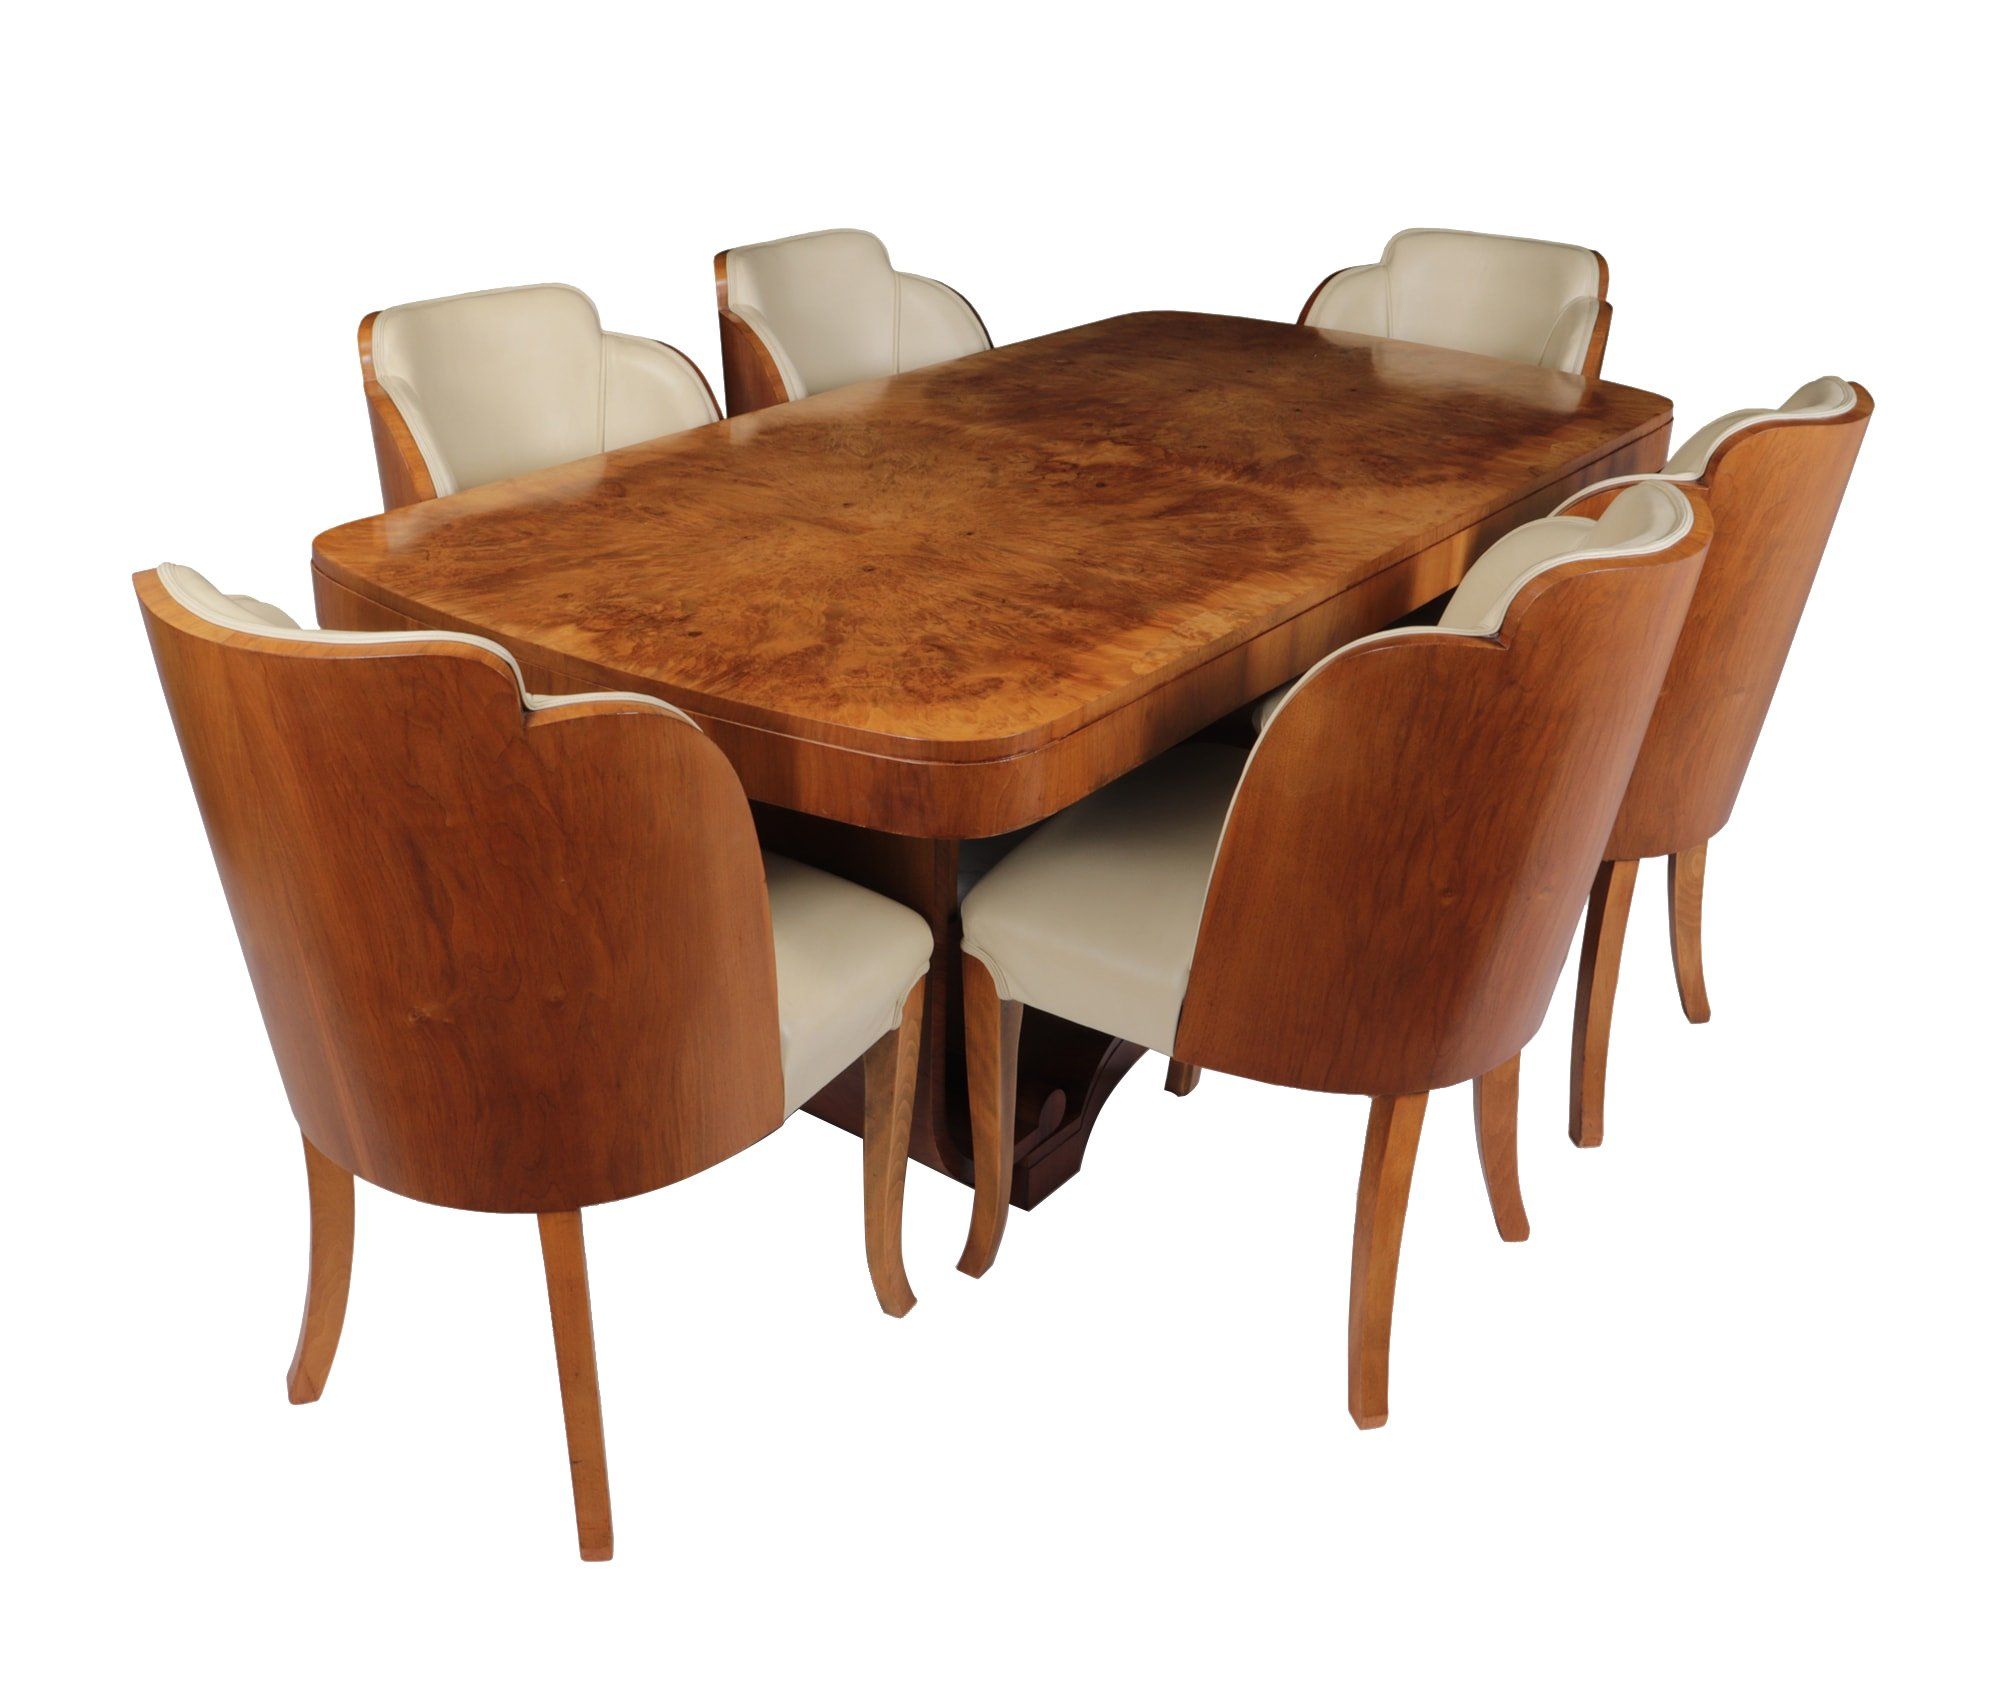 Art Deco Dining Table Chairs By Harry, Art Deco Kitchen Table And Chairs